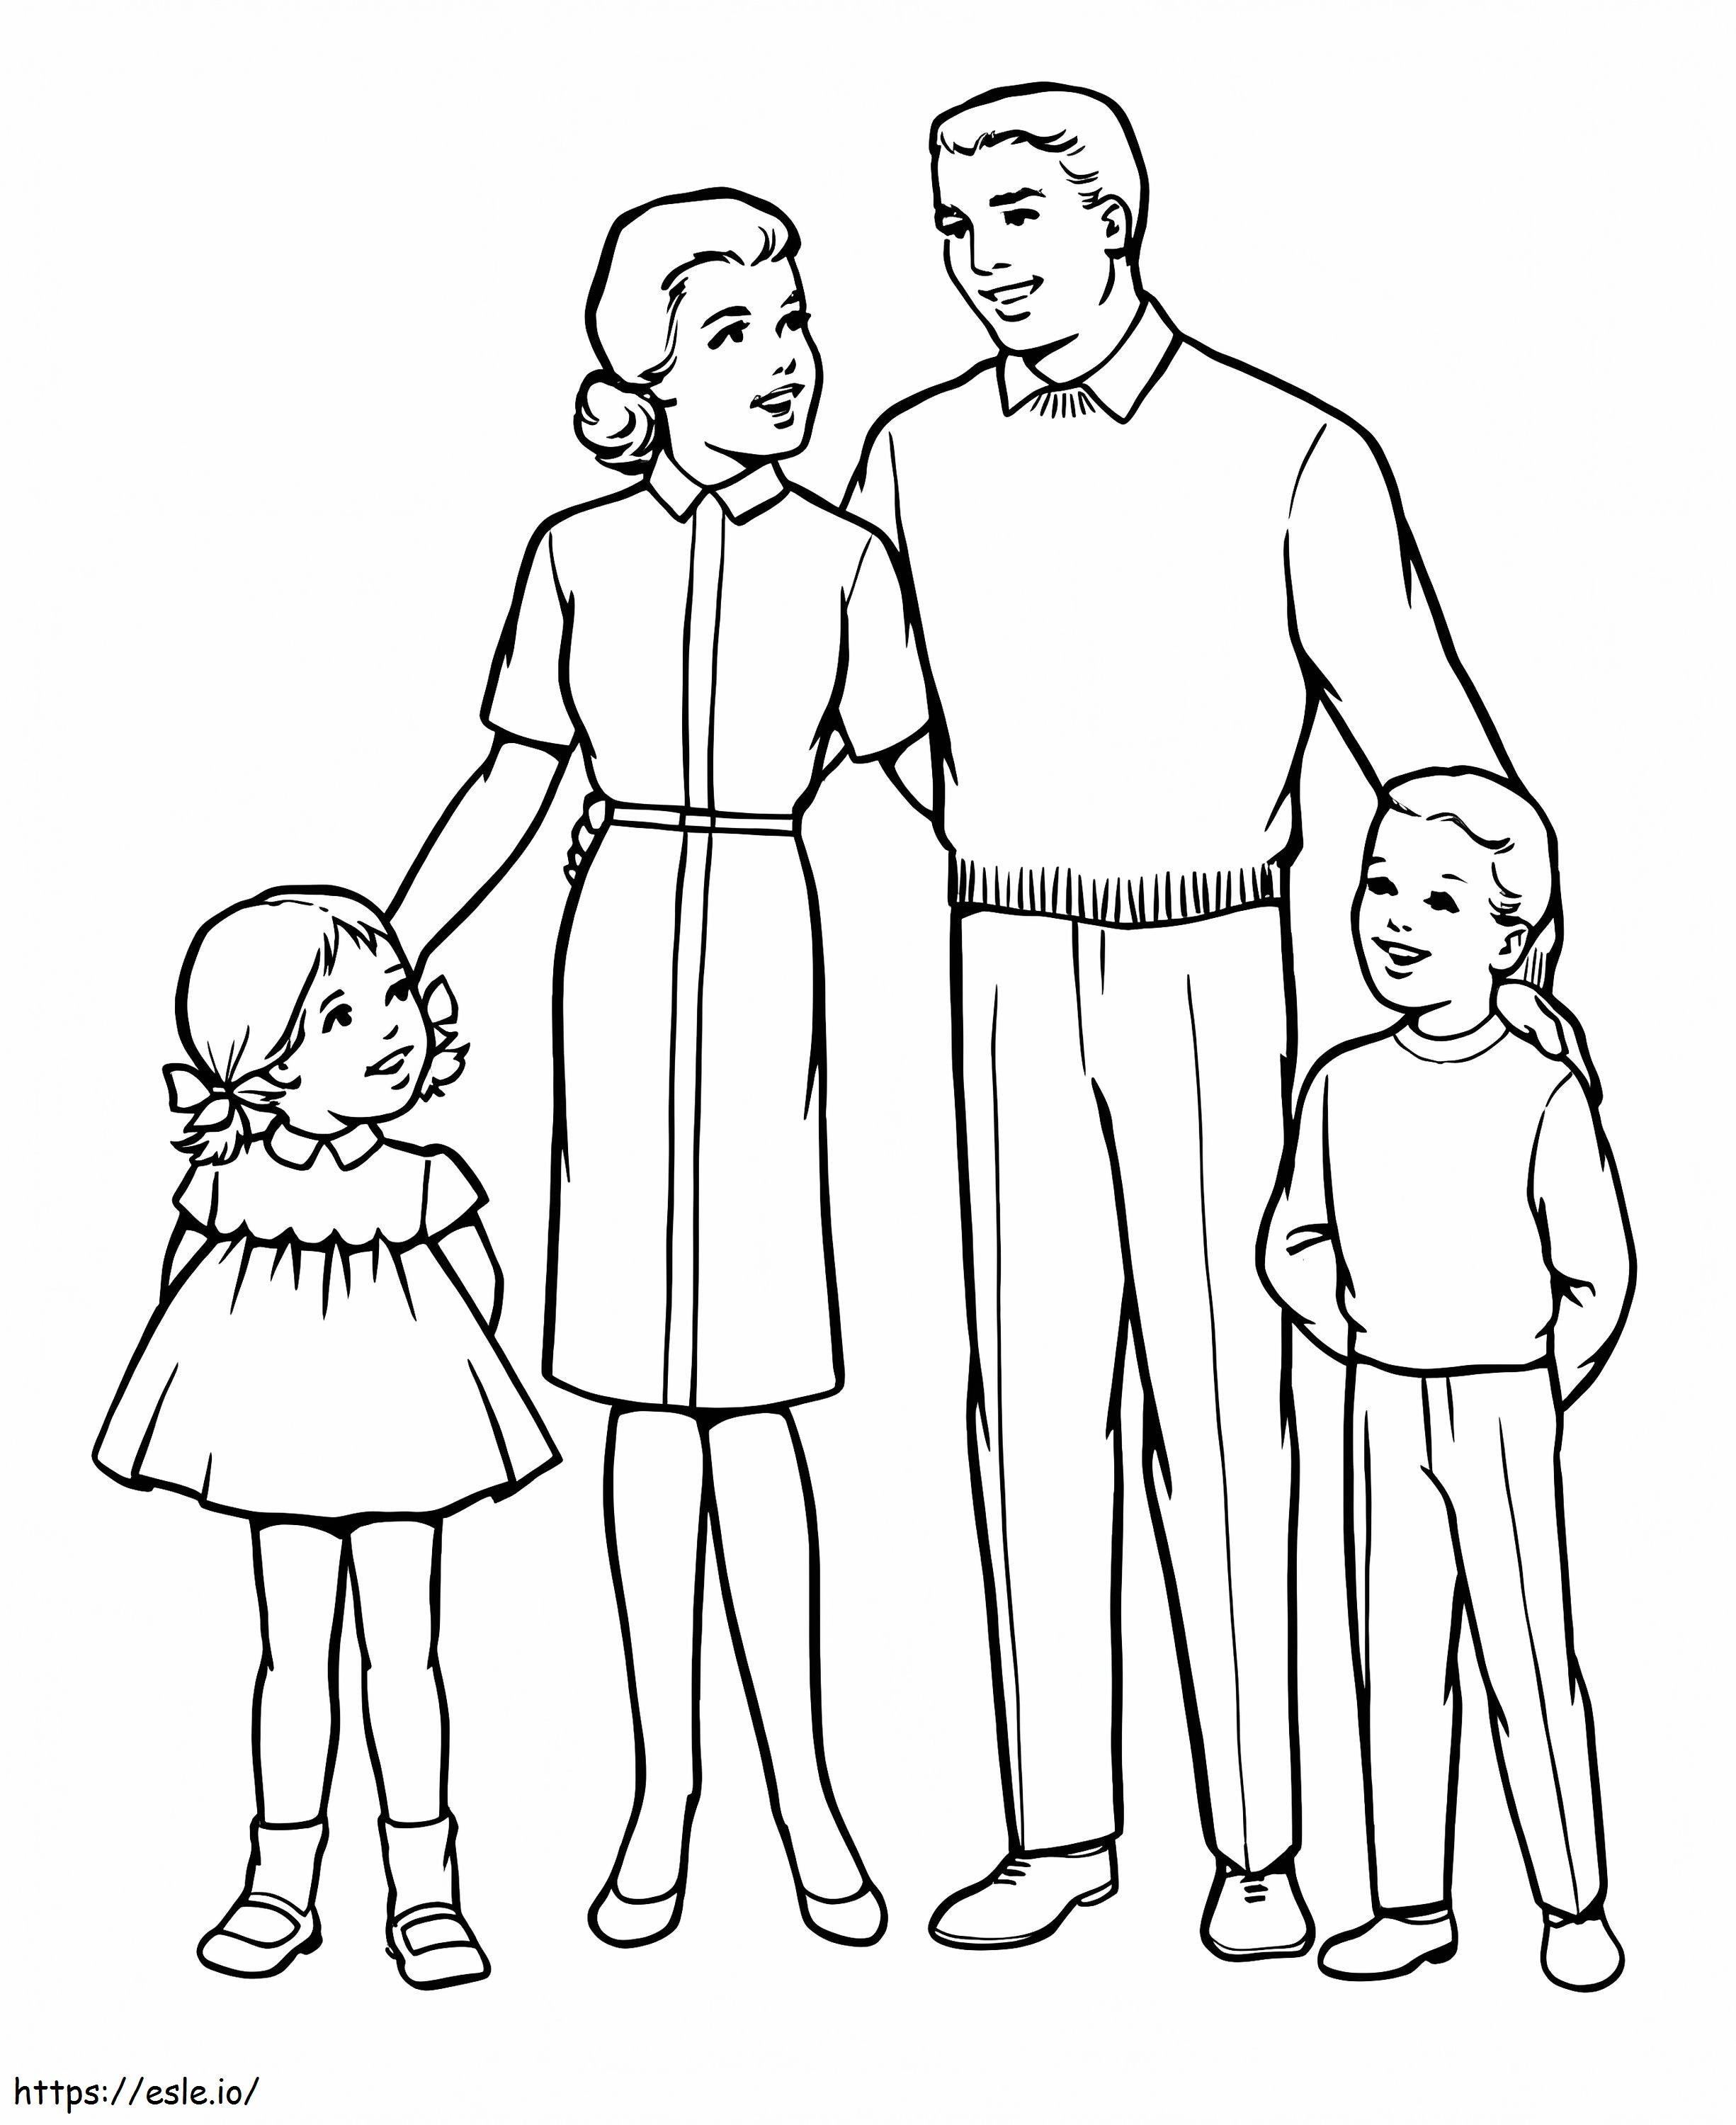 Family 2 coloring page